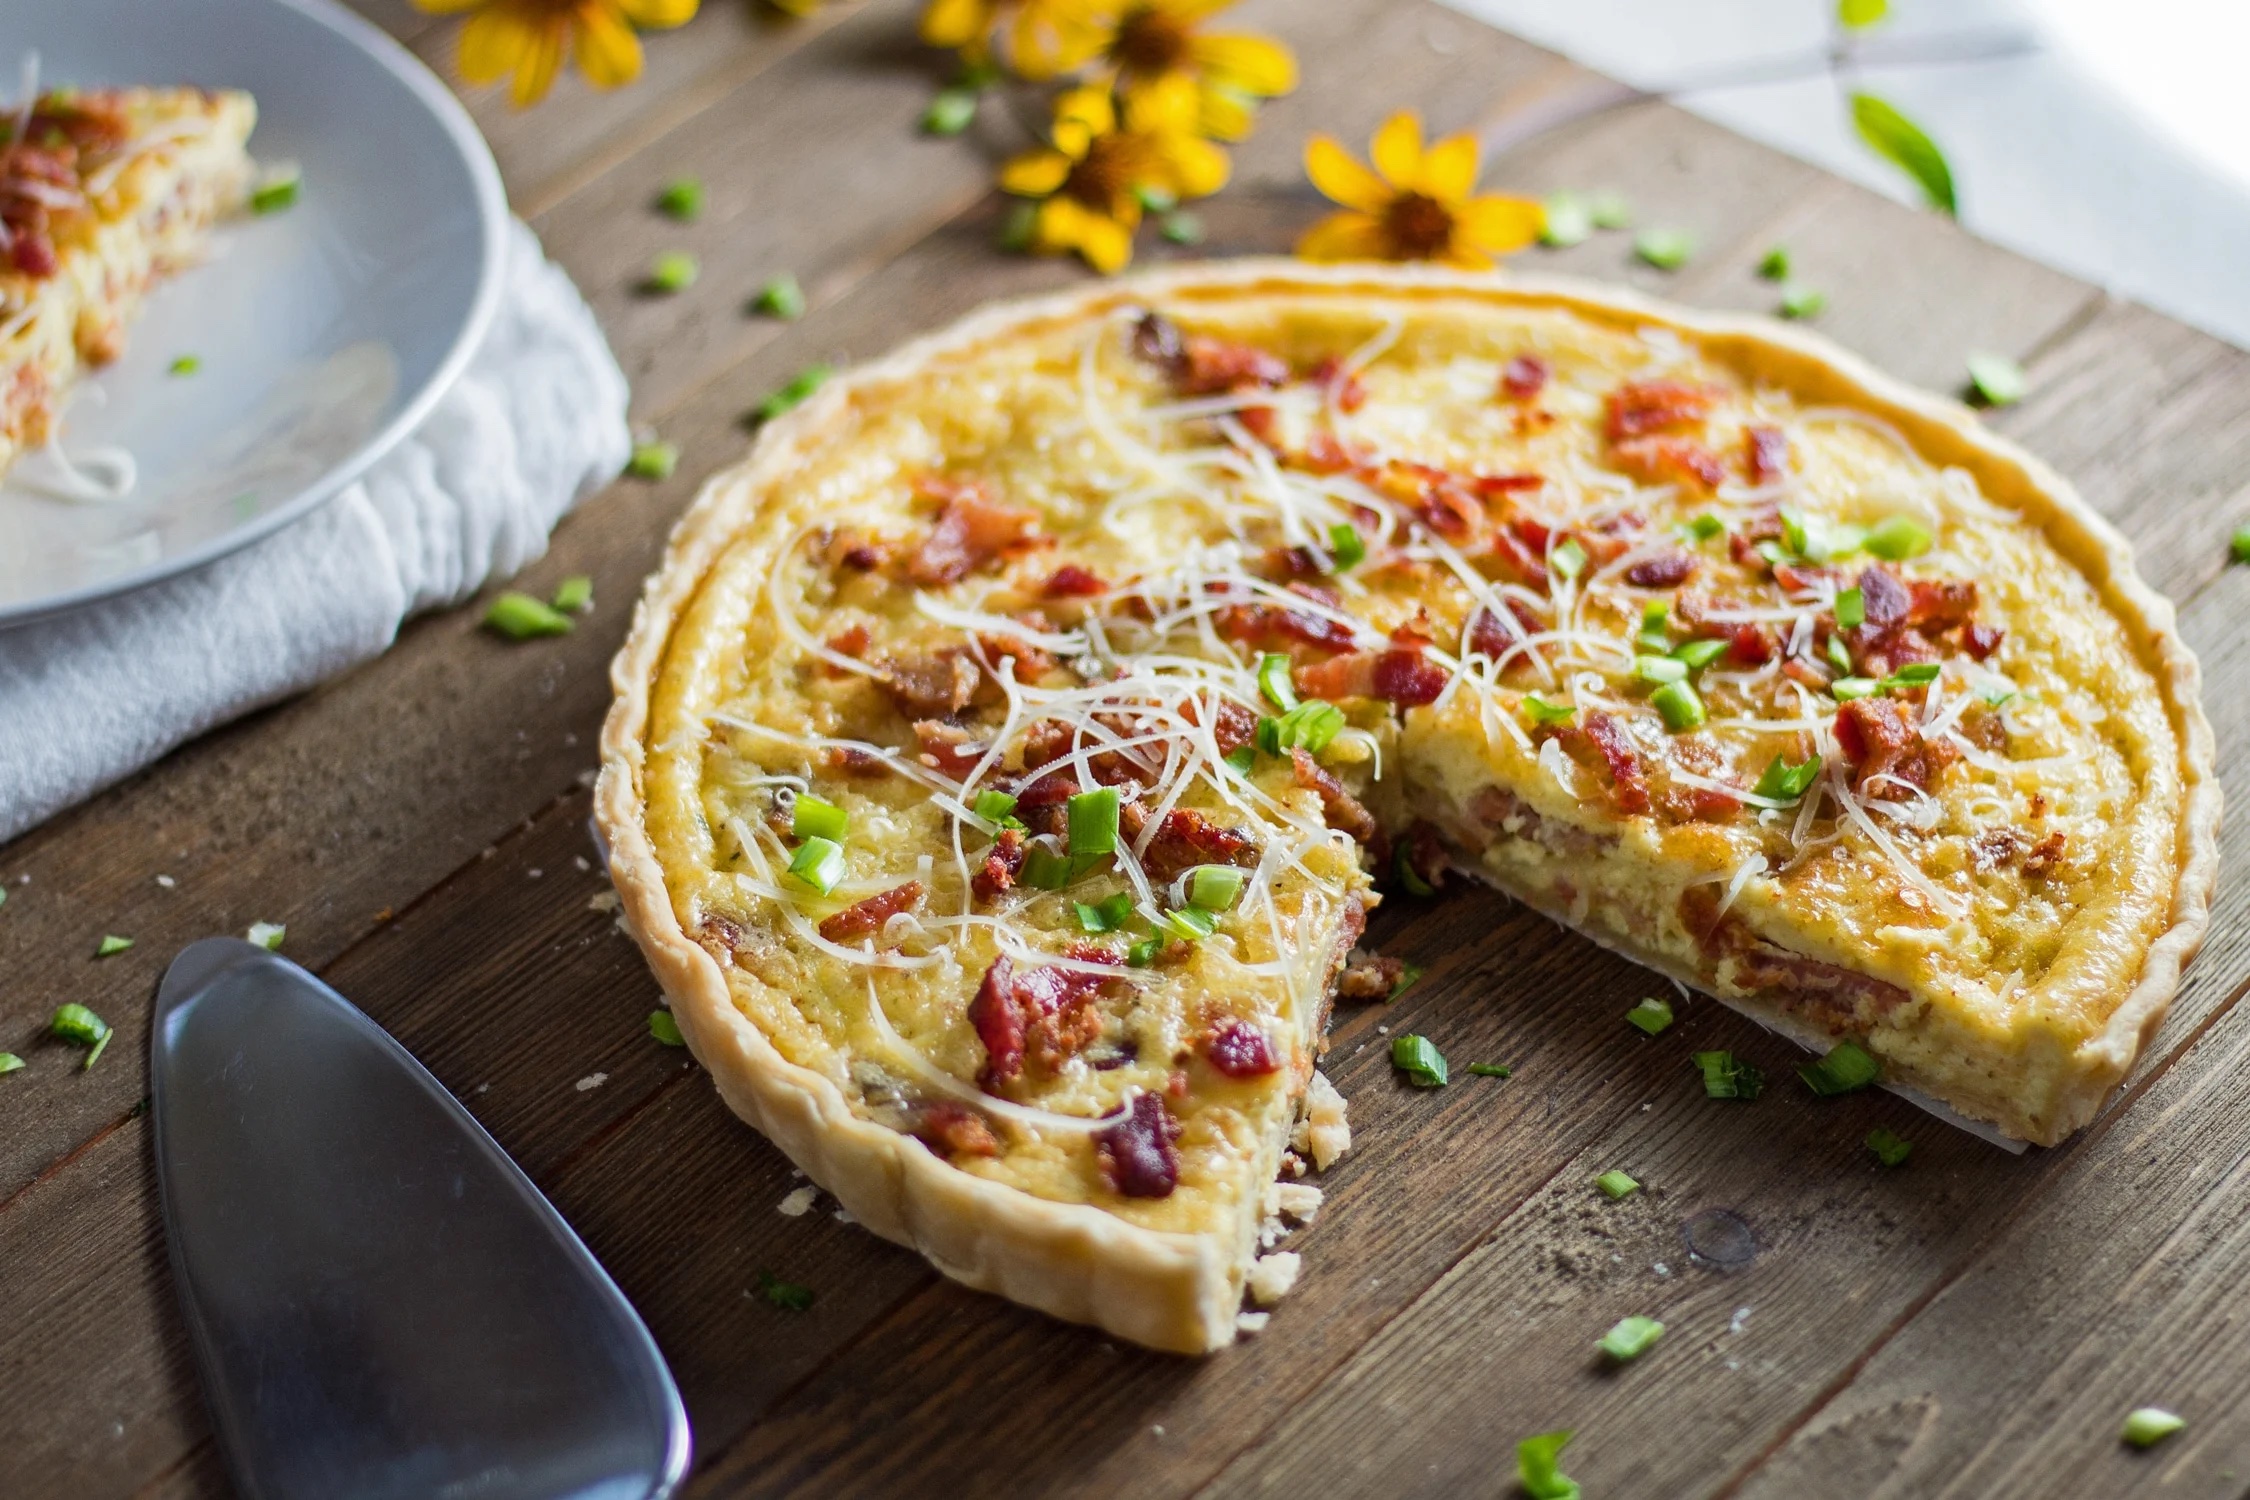 Mothers Day Quiches: Saturday May 12th 4pm-5:30pm, $130